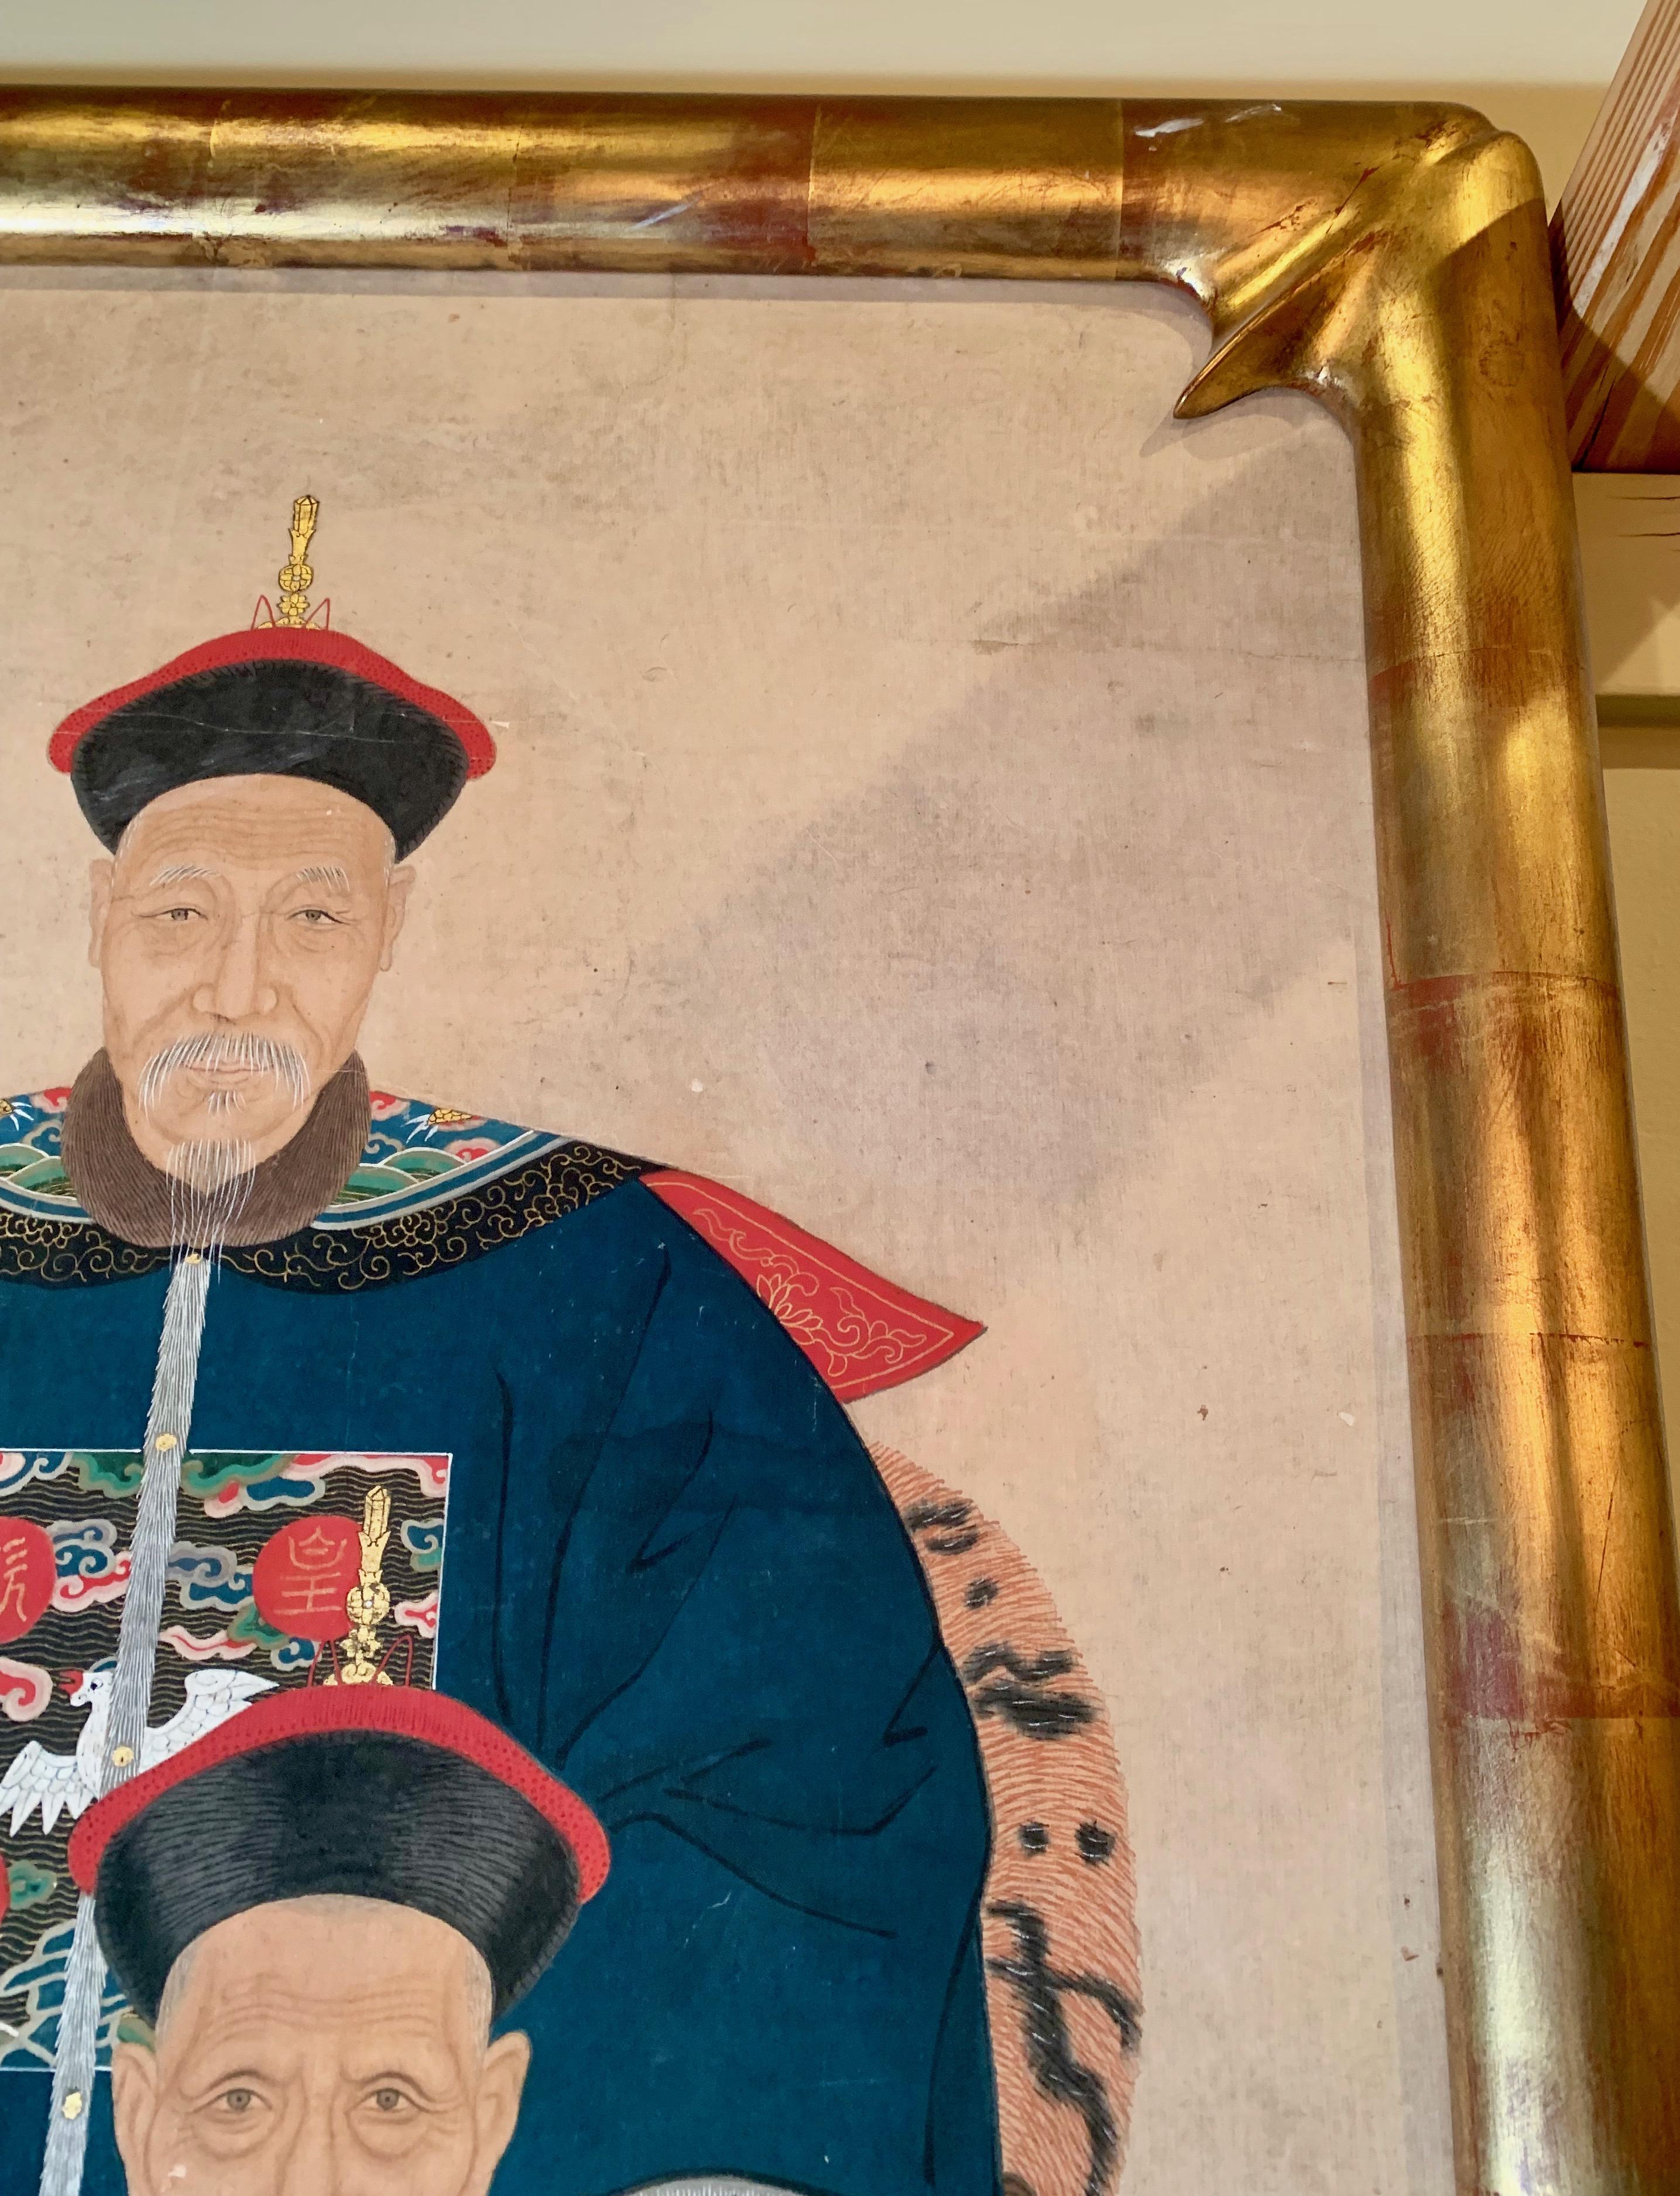 Painted Antique 19th Century Painting on Canvas Depicting Chinese Emperors